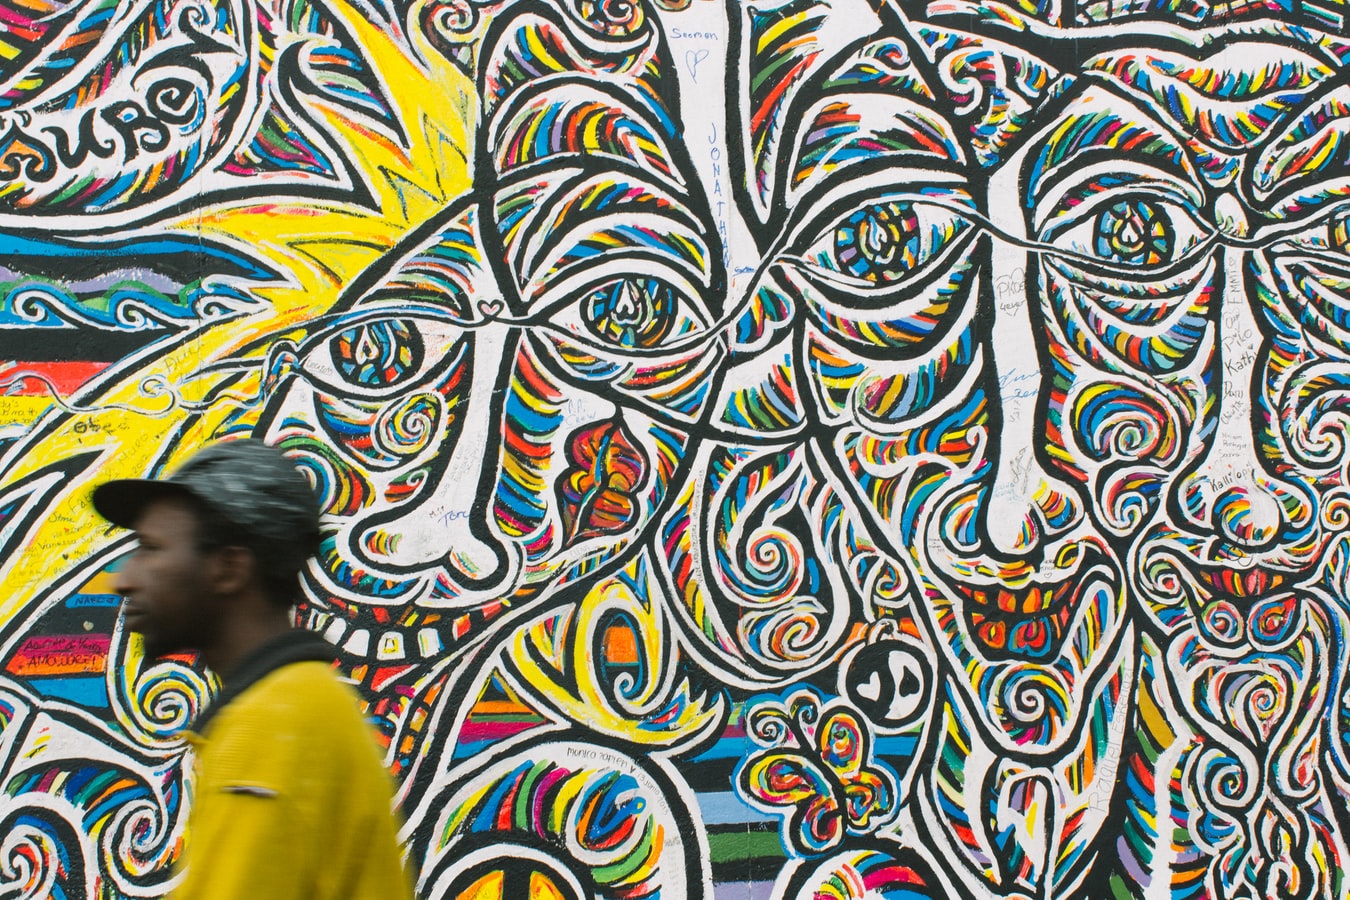 Man walking past a Wall of faces